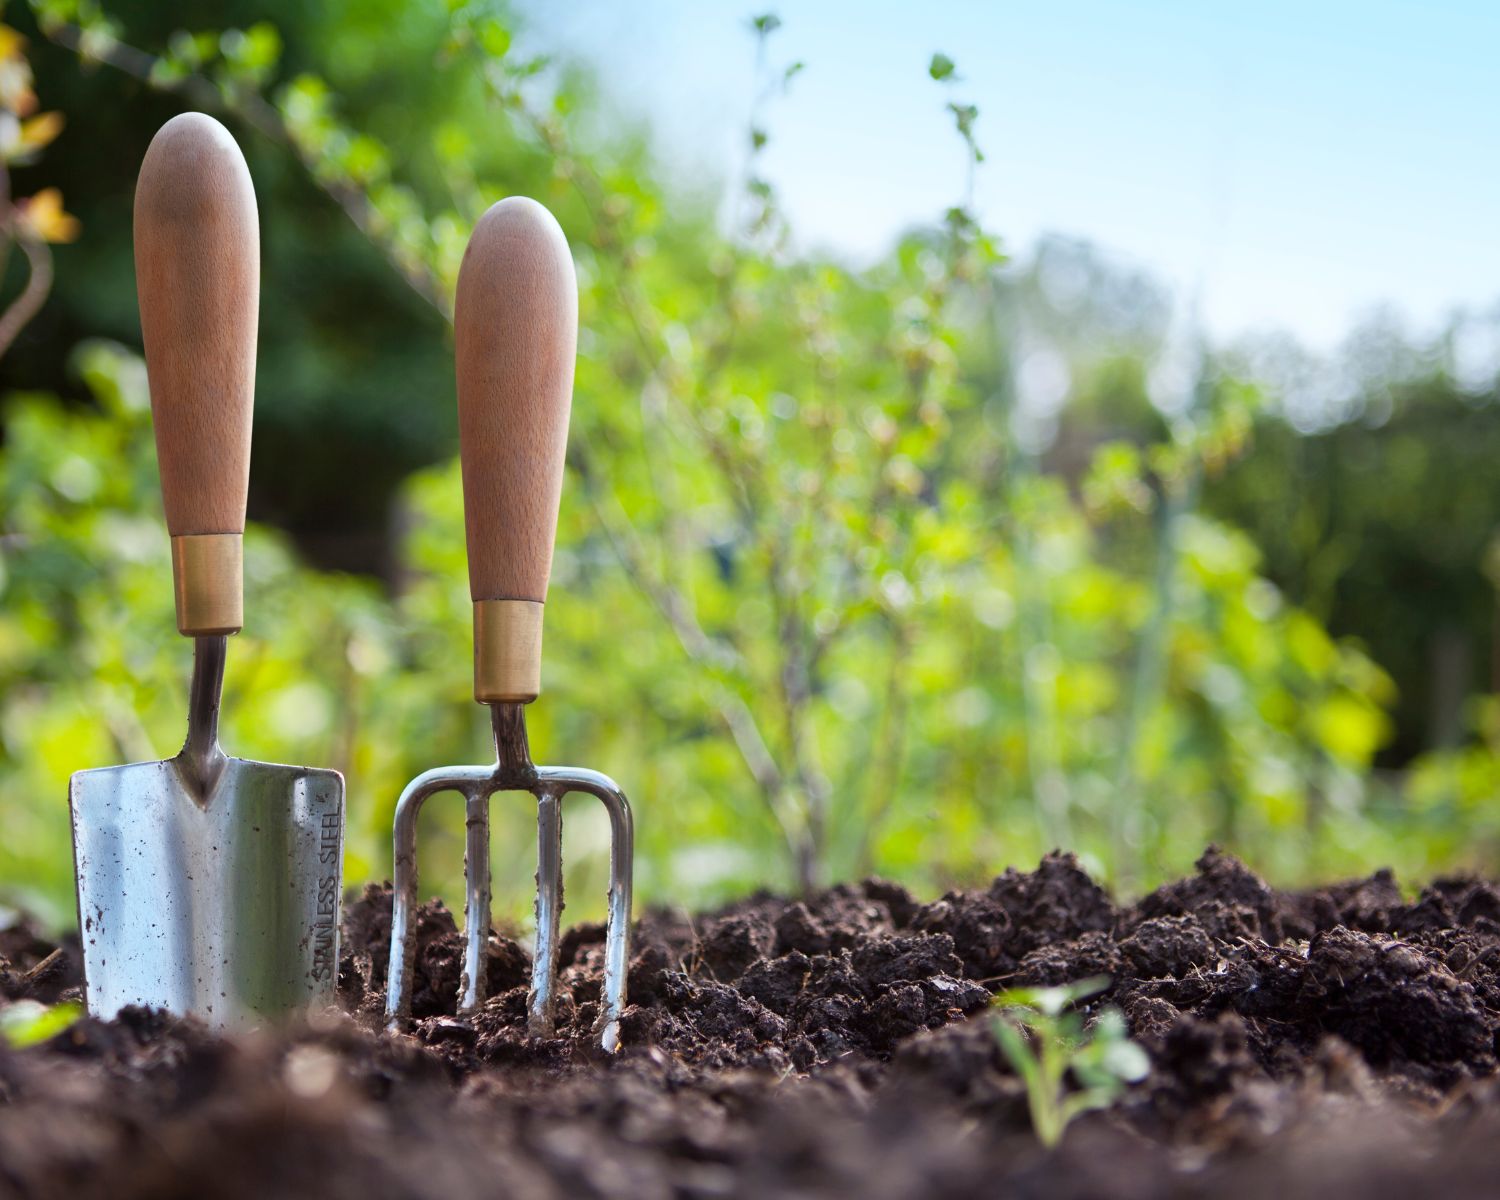 A picture taken in a garden showing the soil, trees and bushes in the background. In the foreground are 2 gardening tools. 